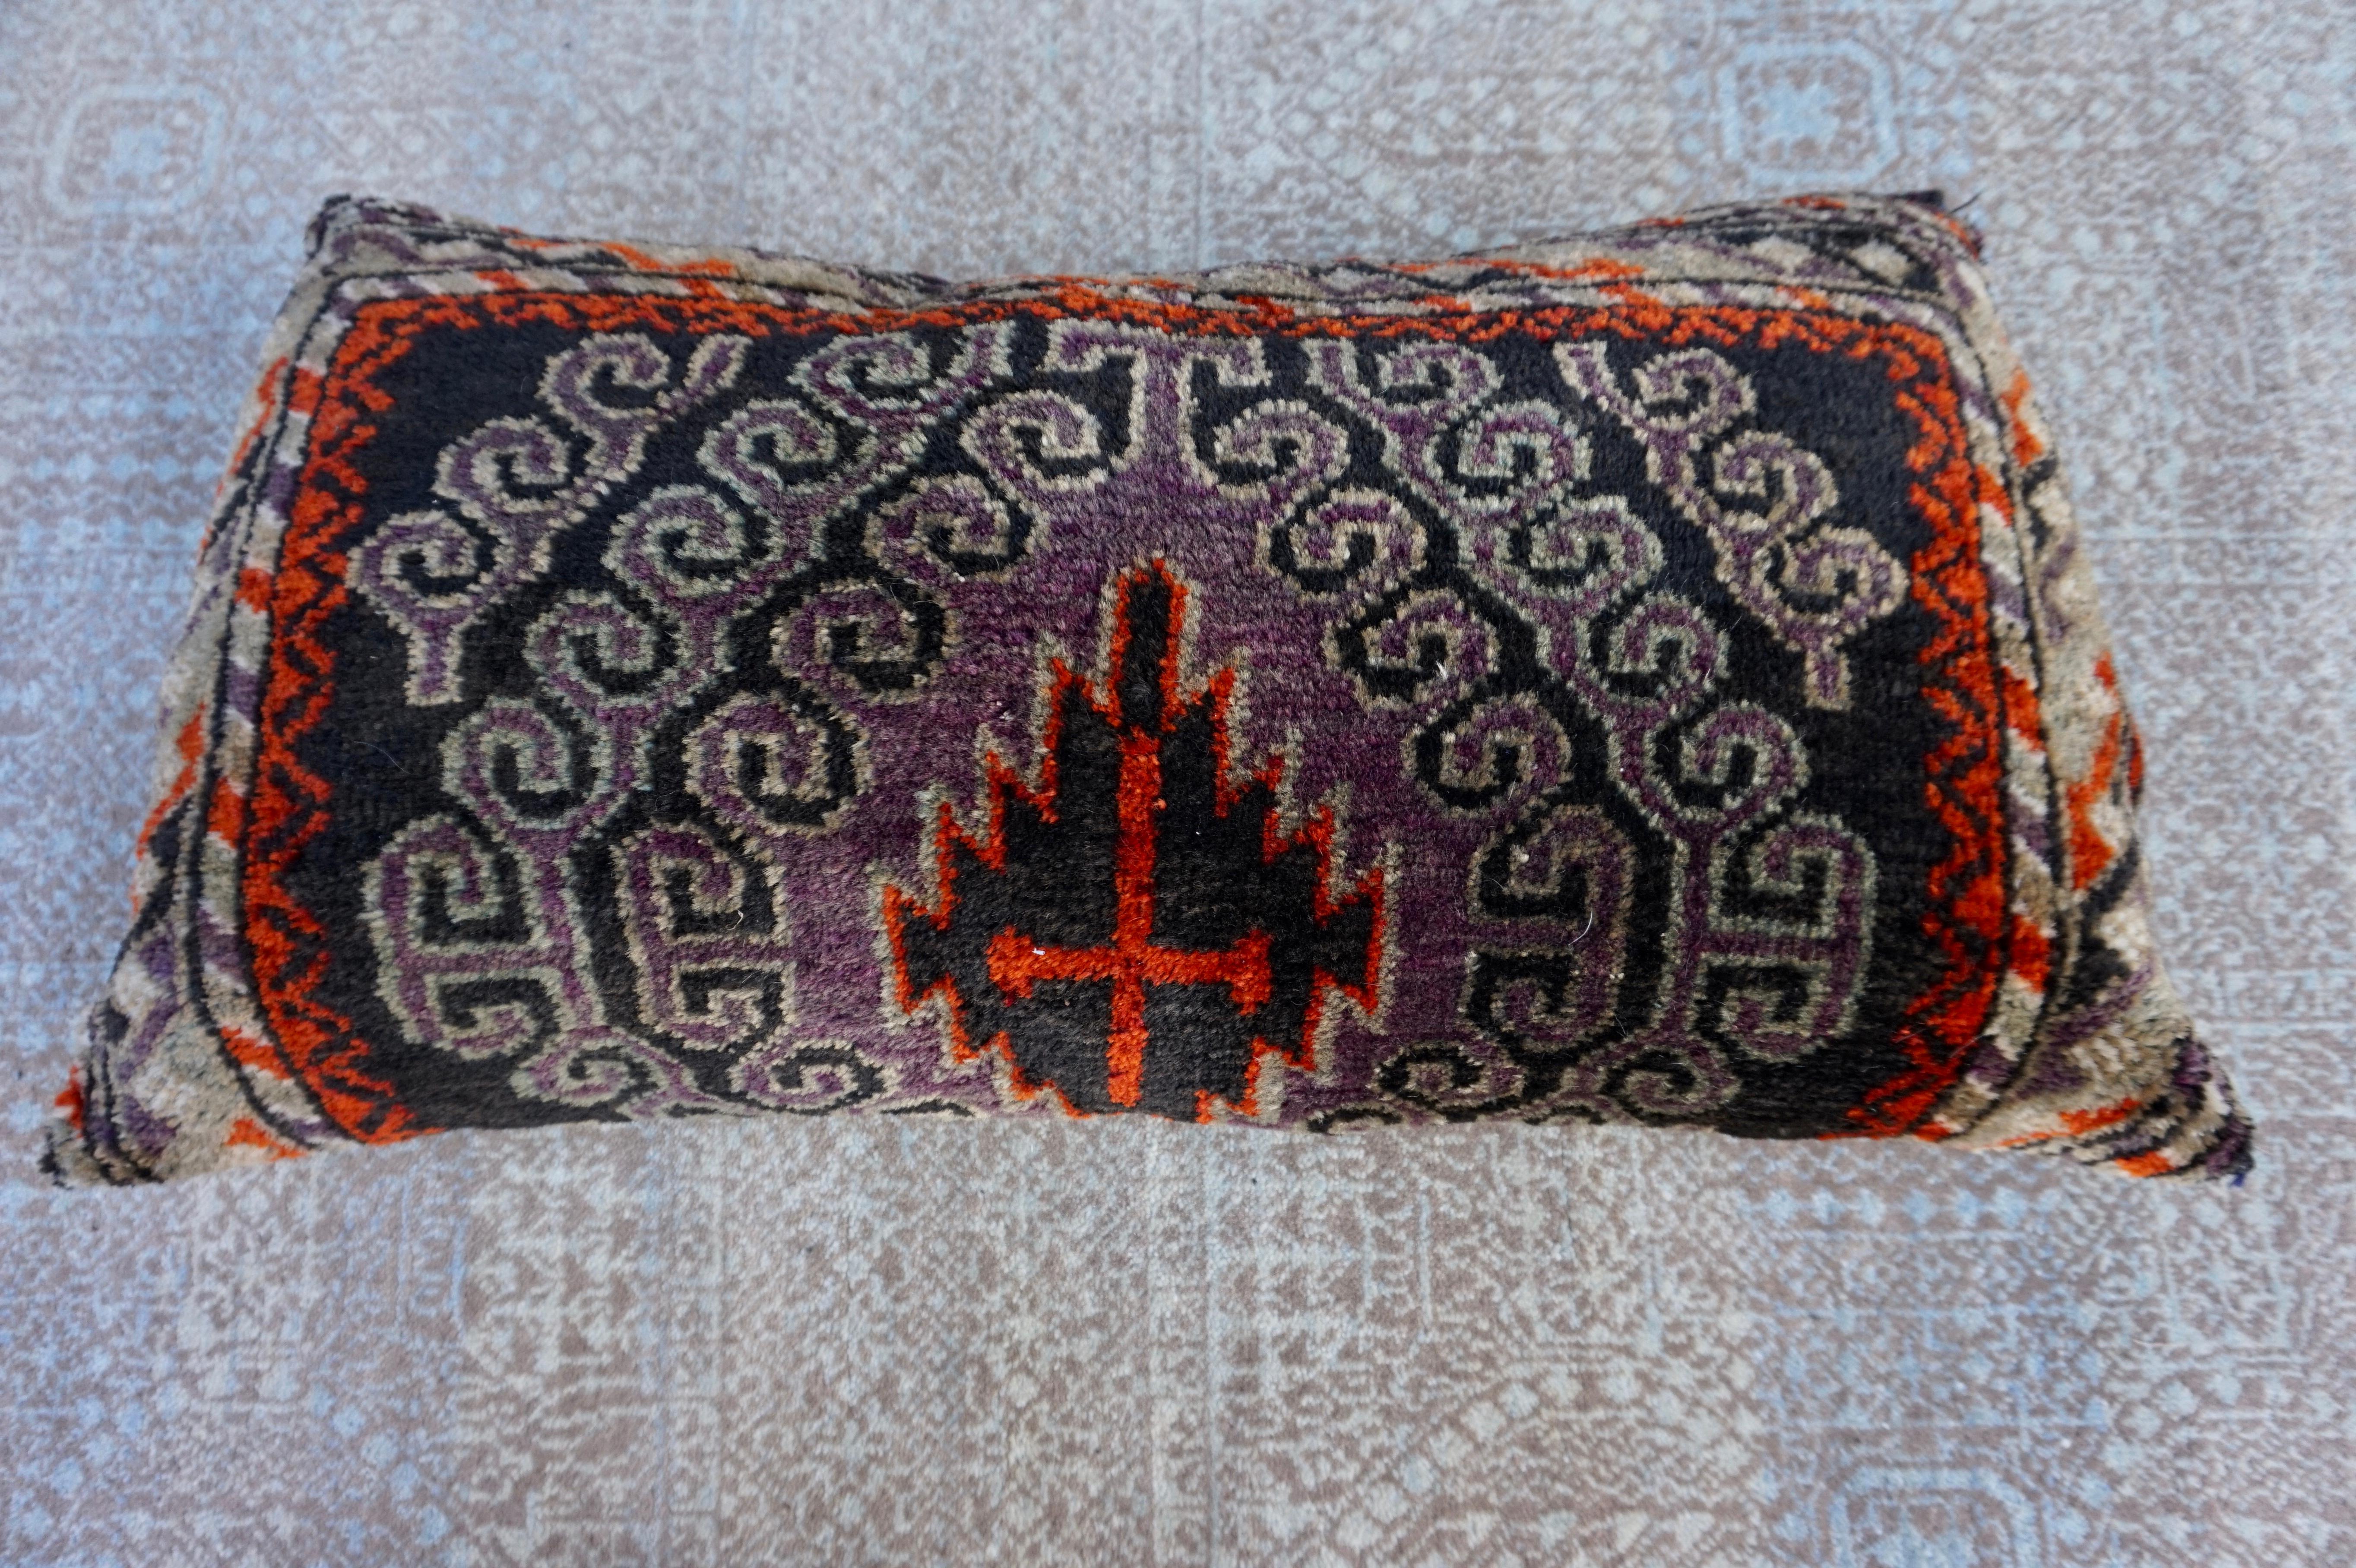 Rustic Hand-Knotted Wool Cushion Pillow with Geometric Tribal Patterns For Sale 2